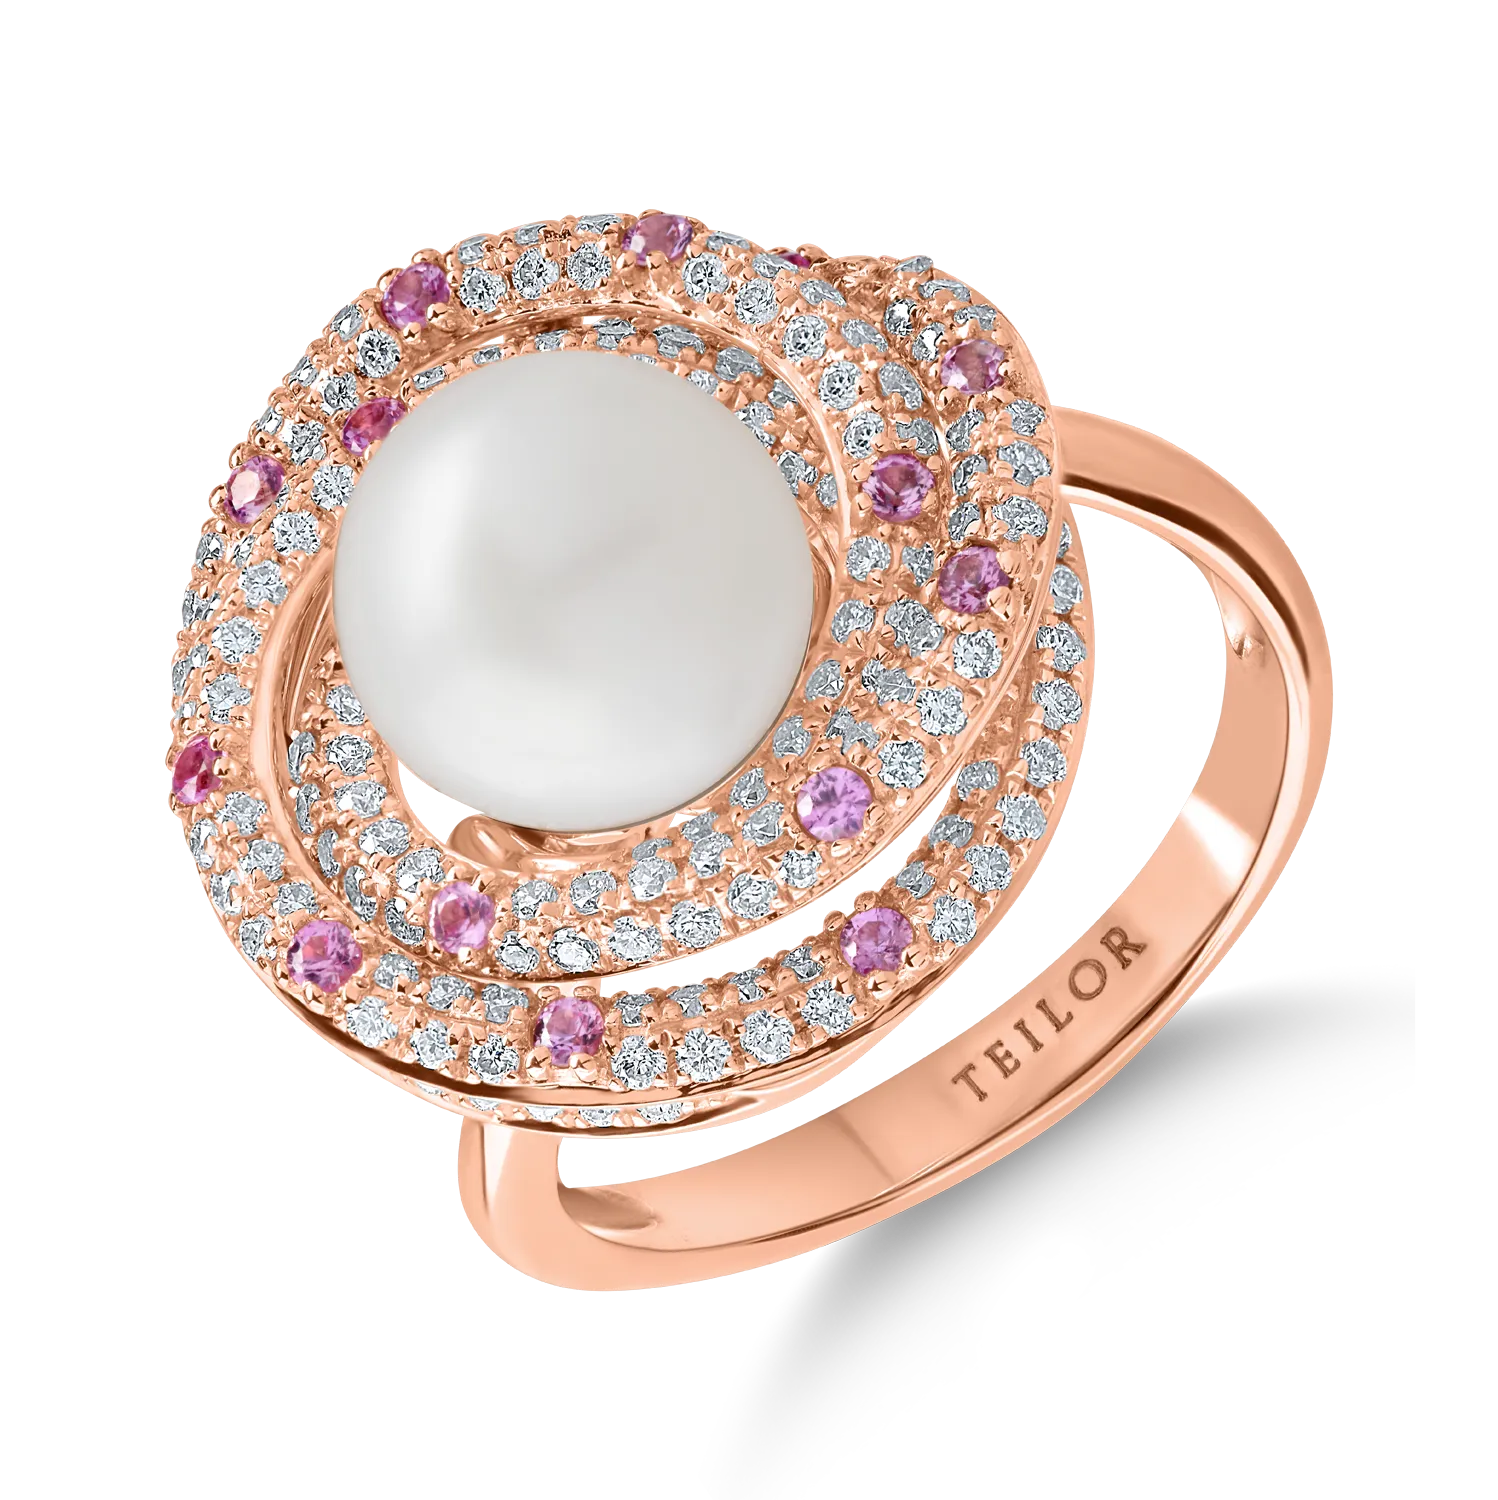 Rose gold ring with 5.1ct precious and semi-precious stones